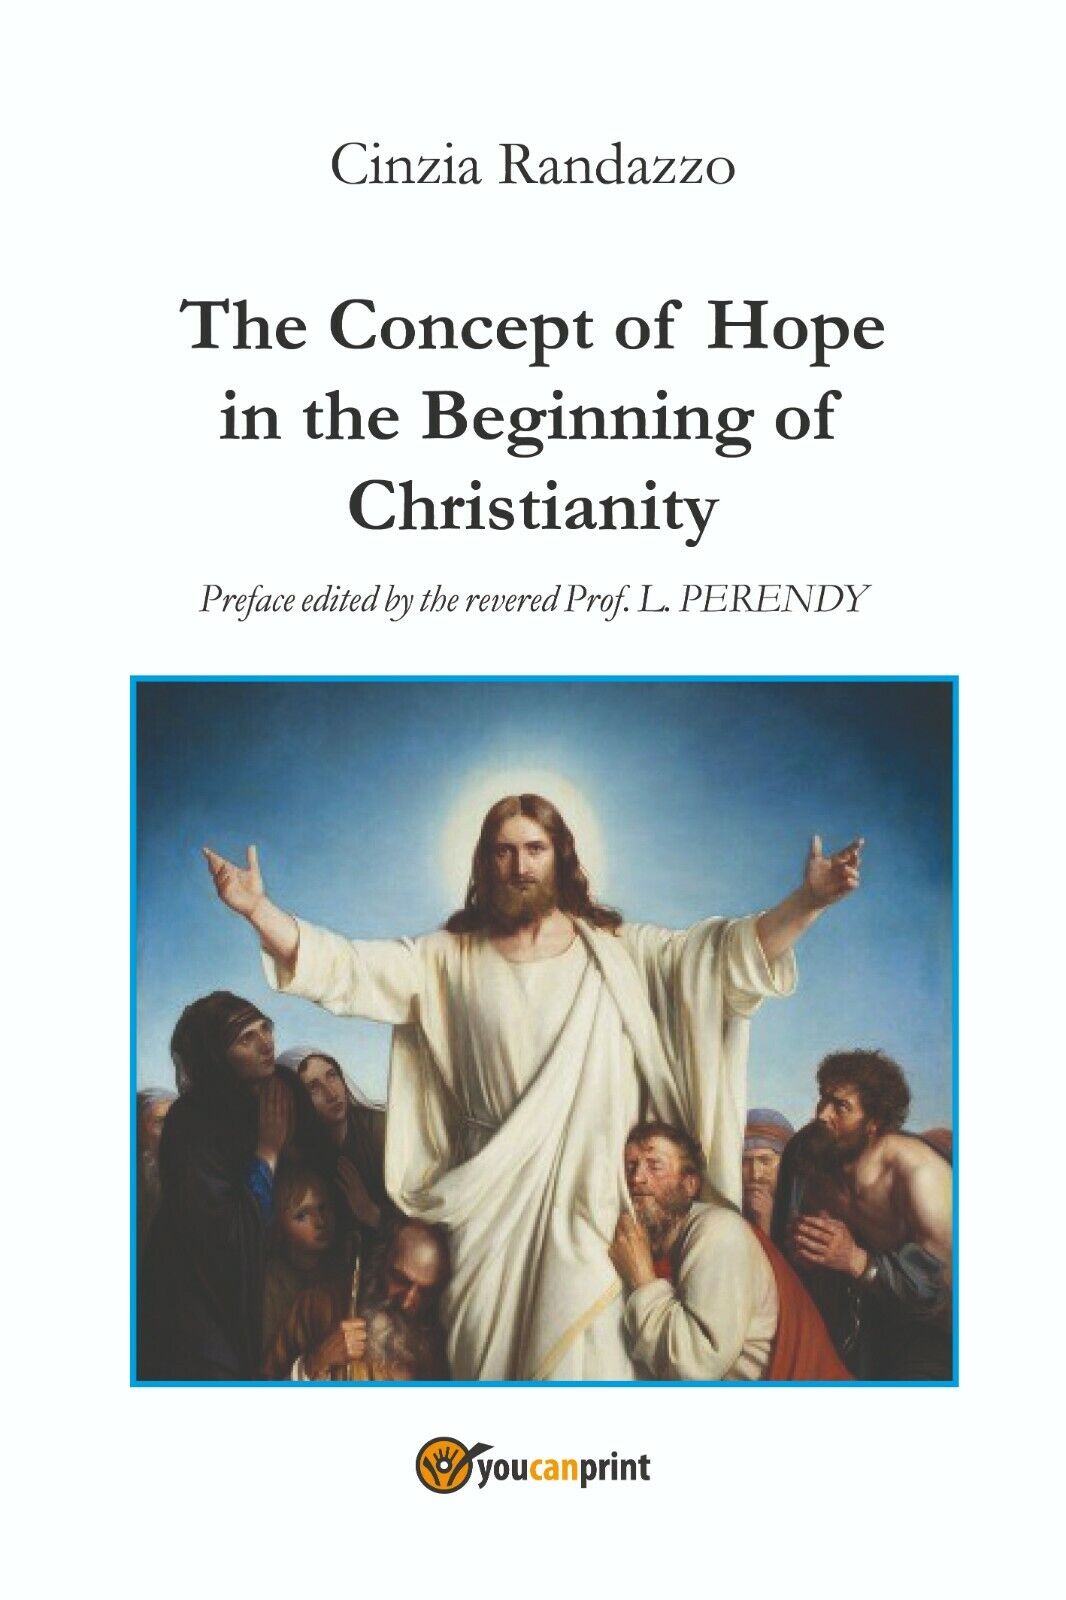 The Concept of Hope in the Beginning of Christianity, Cinzia Randazzo,  2017 libro usato